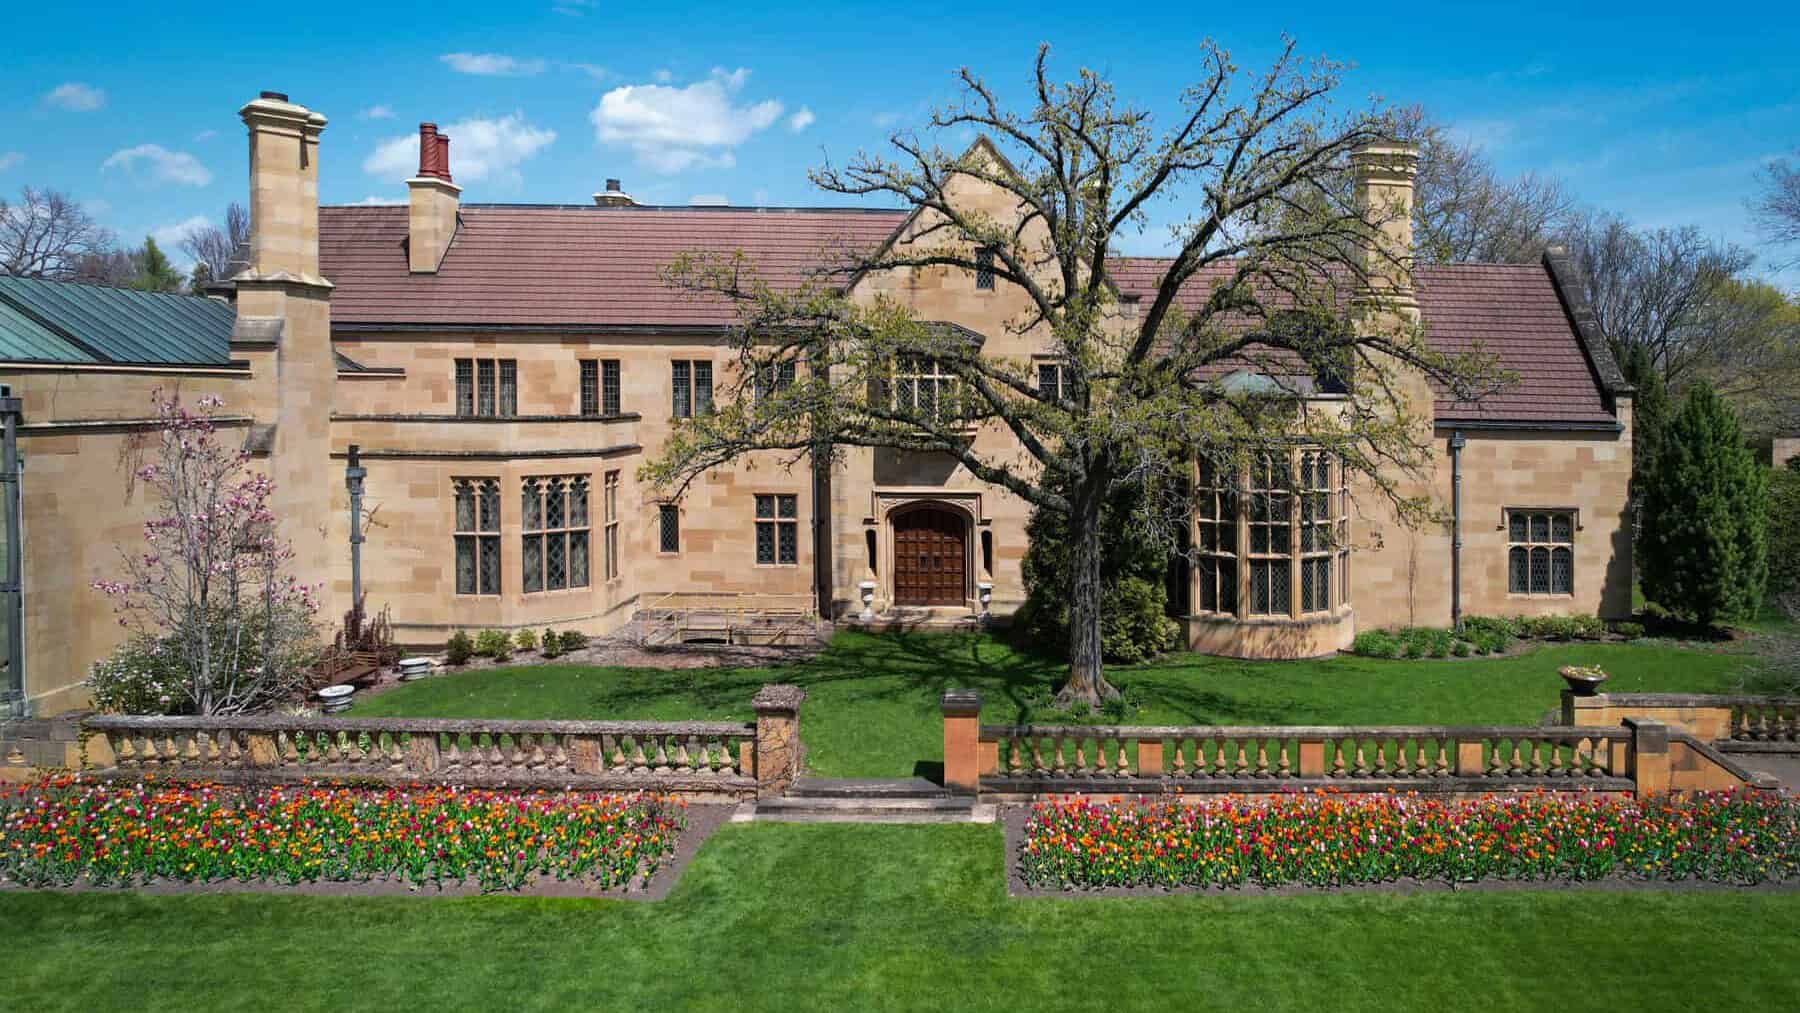 The front façade of the mansion with blooming tulips in spring.